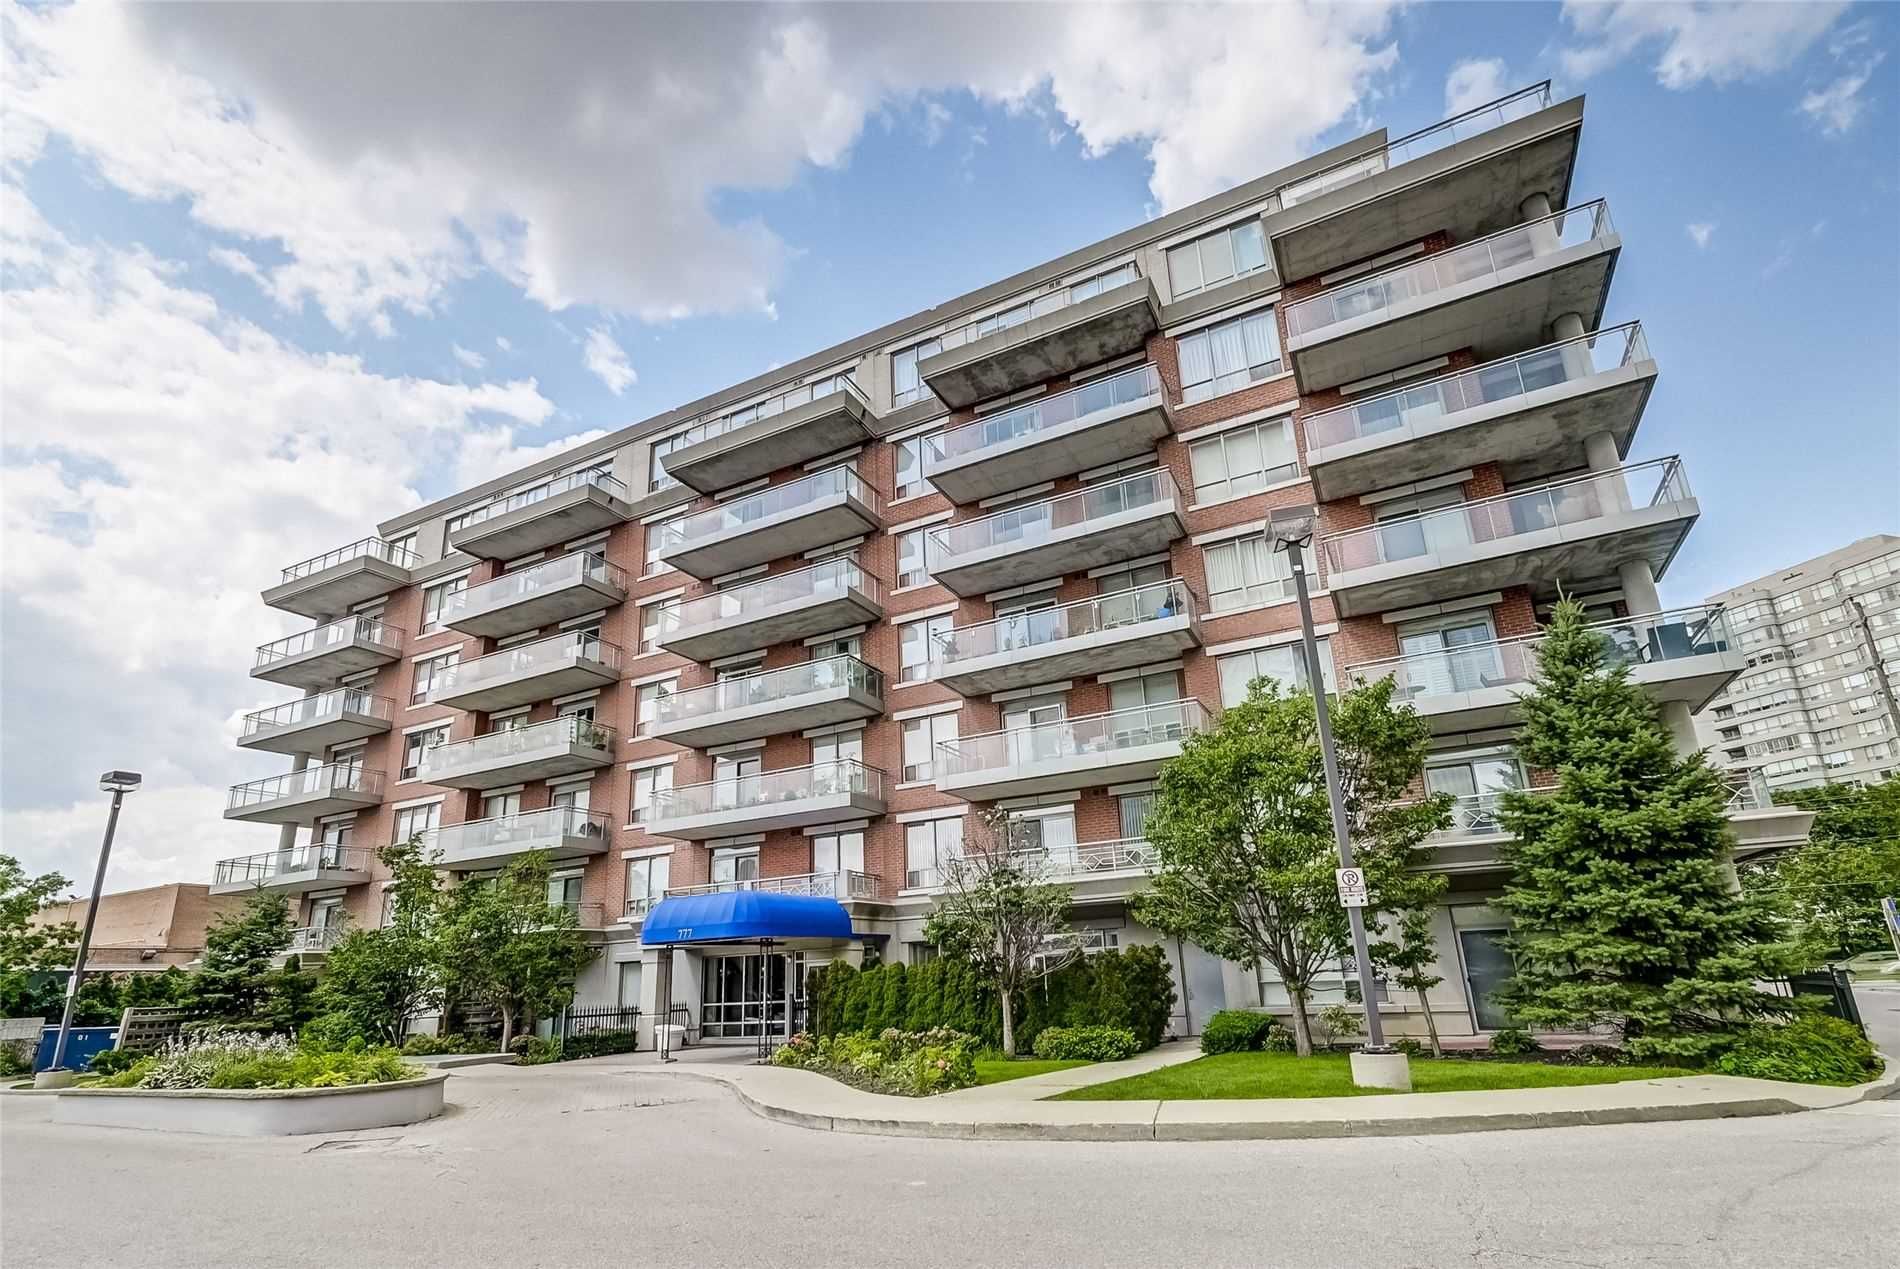 777 Steeles Ave W. This condo at 777 Steeles Ave Condos is located in  North York, Toronto - image #1 of 2 by Strata.ca